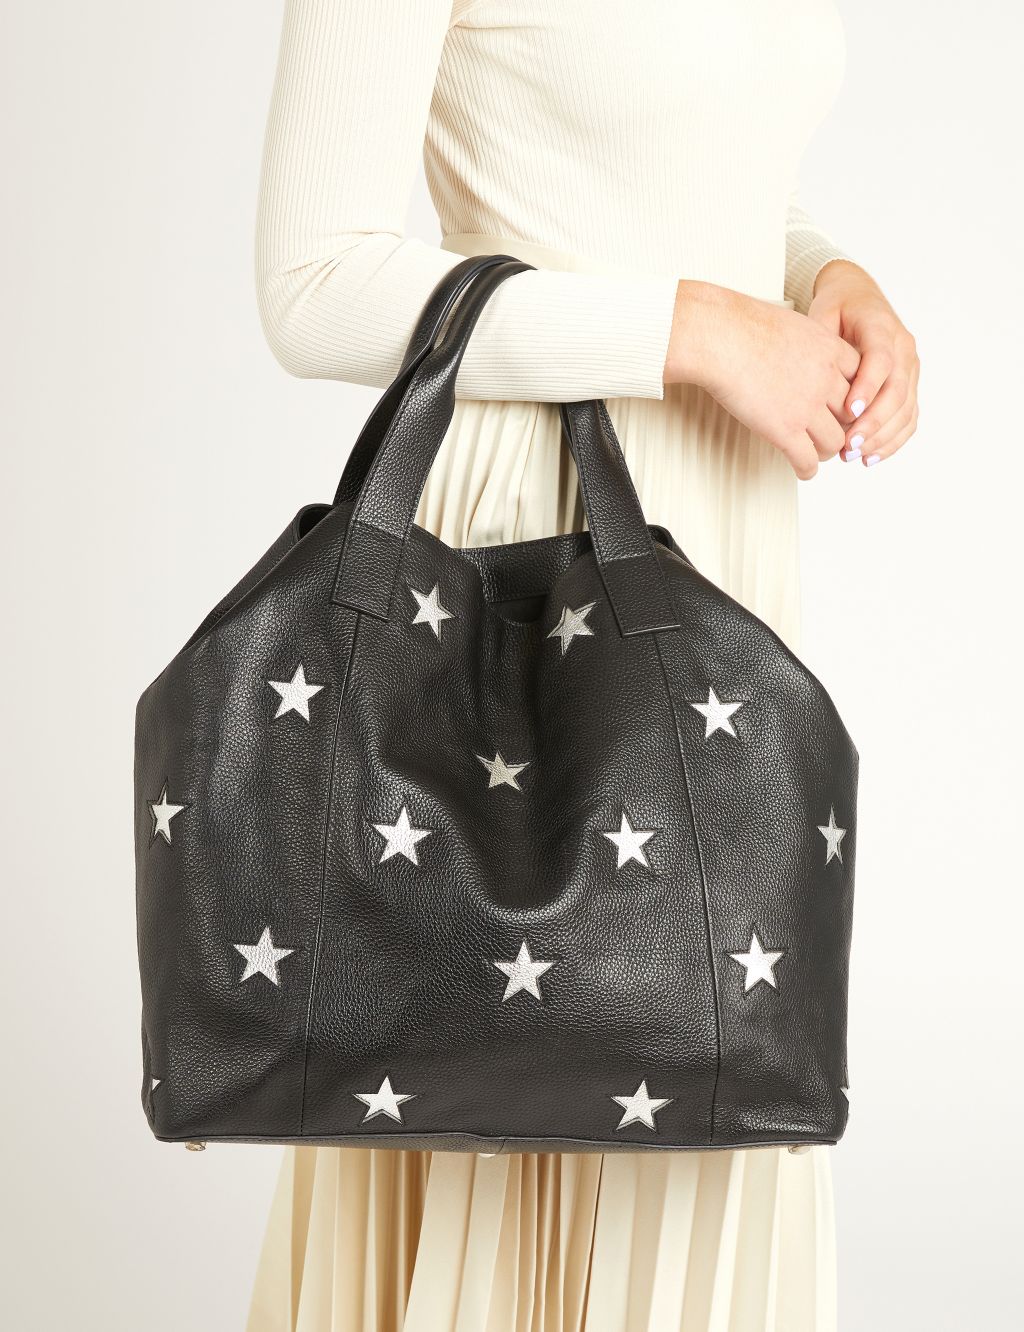 Leather Star Tote Bag